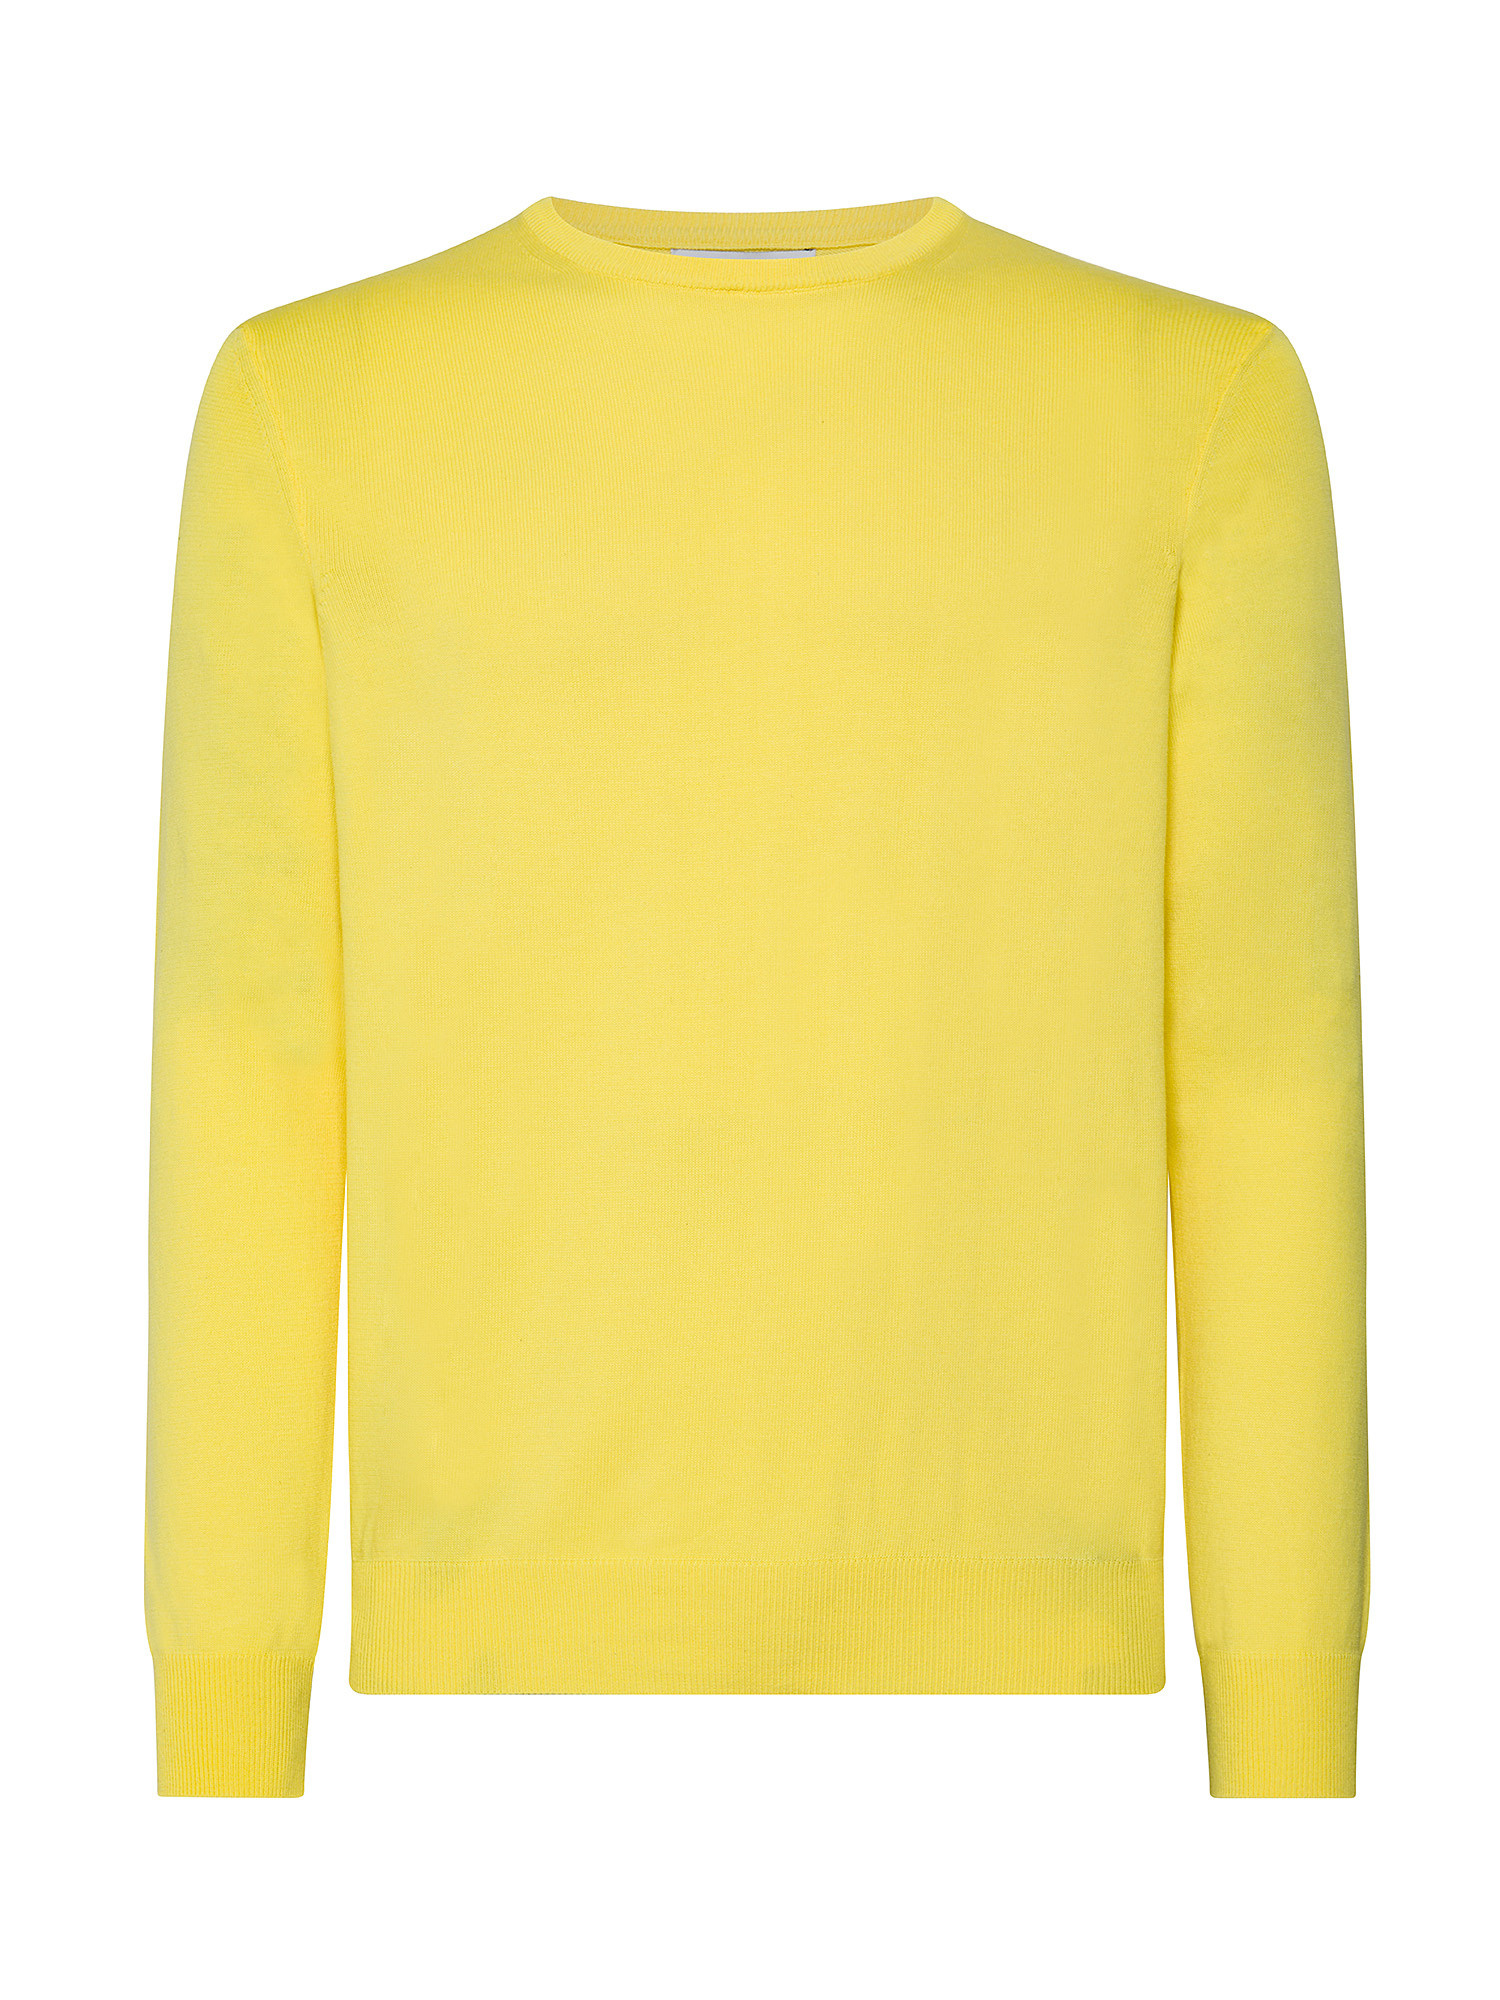 Luca D'Altieri - Crew neck sweater in extrafine pure cotton, Yellow, large image number 0